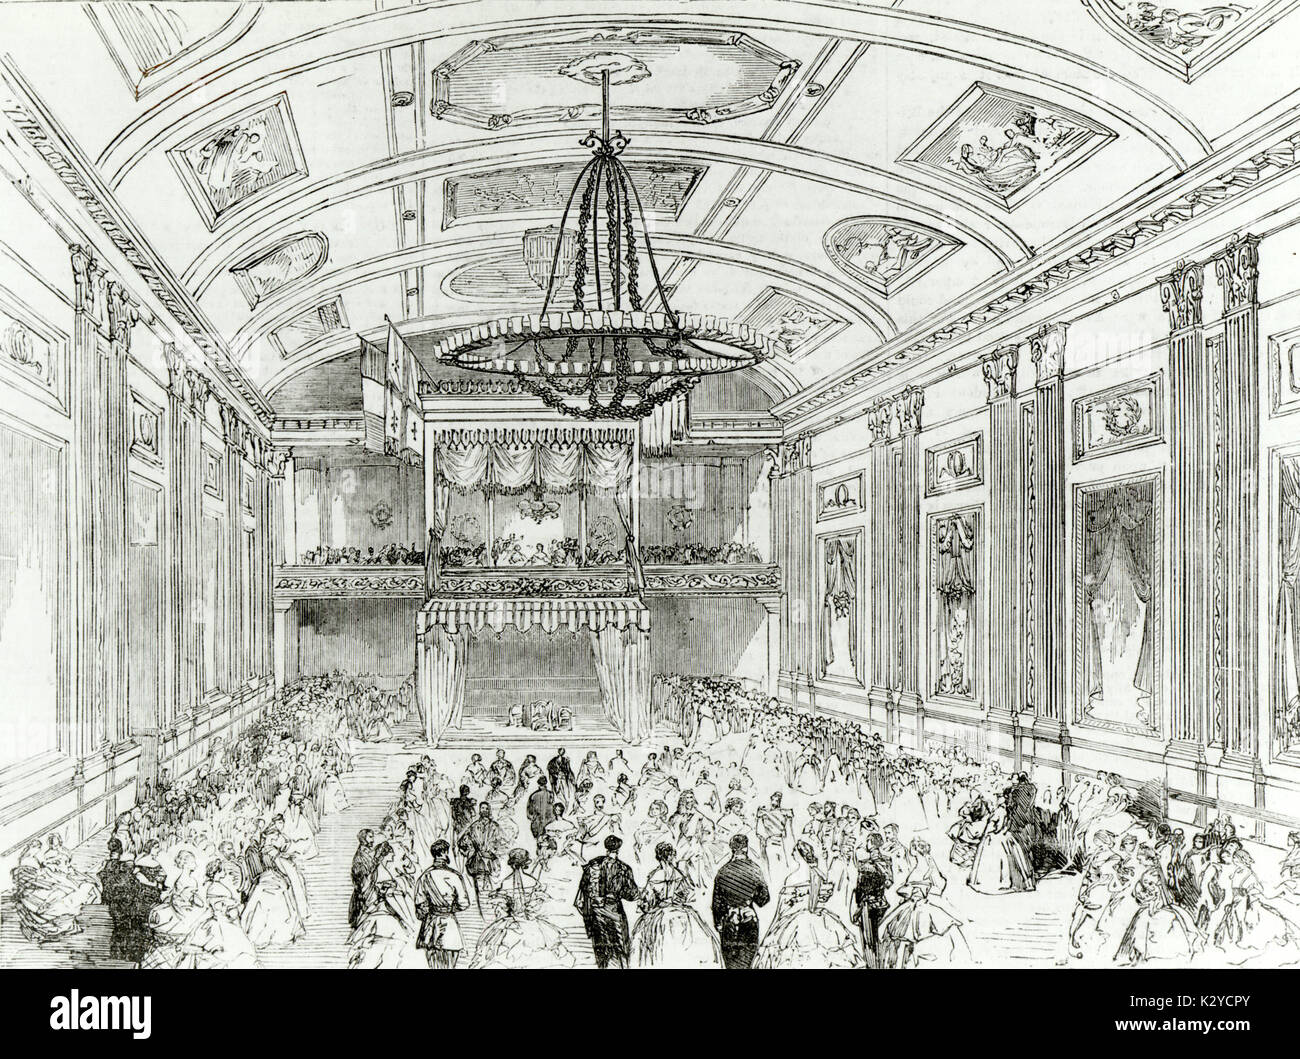 LONDON - Hanover Square Rooms The fancy dress ball of the Royal Academy of Music, at the Hanover-Square Rooms (c.1860s). Illustrated London News Stock Photo